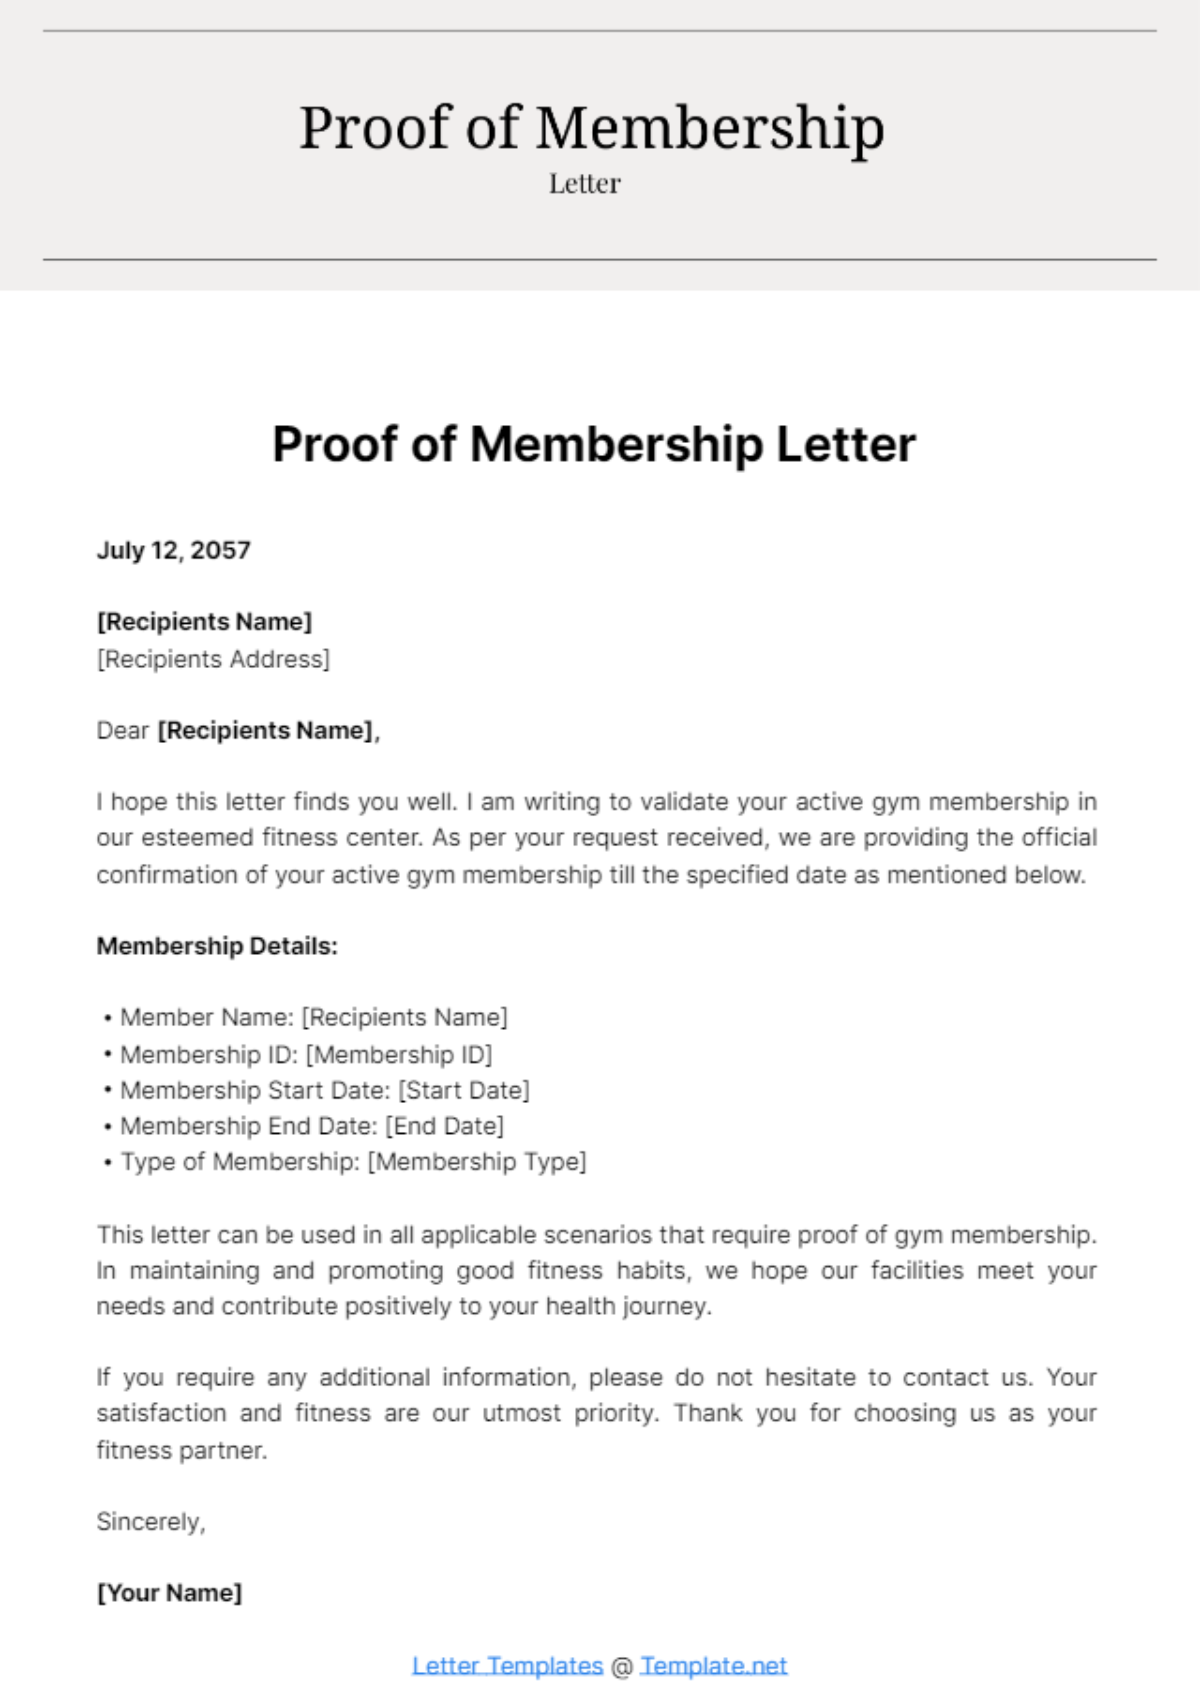 Free Proof of Membership Letter Template